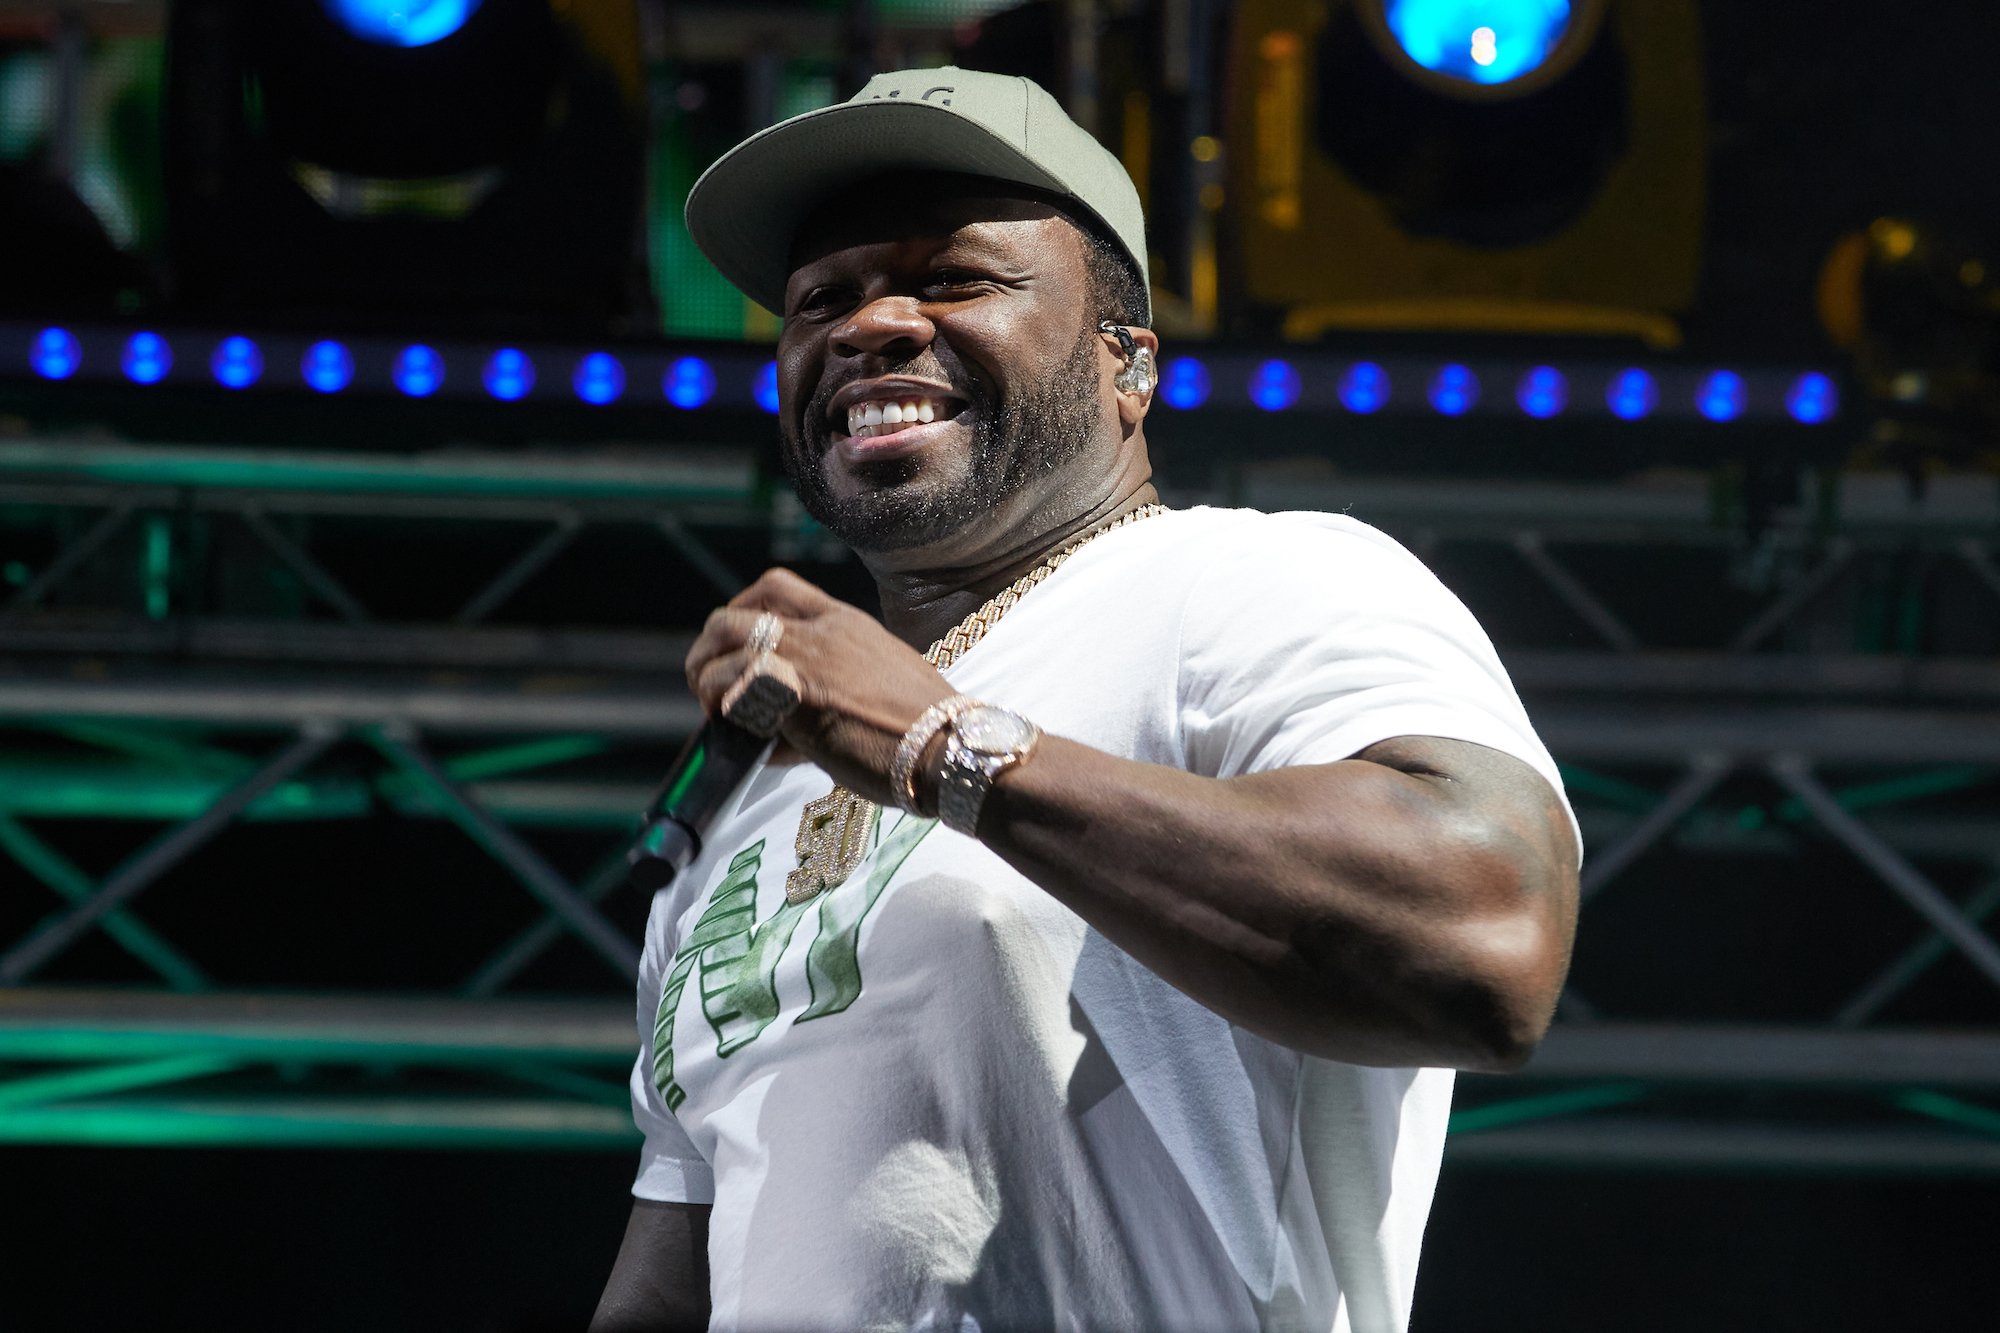 50 Cent, who replaced T.I. with Method Man on 'Power Book II: Ghost', performing on stage